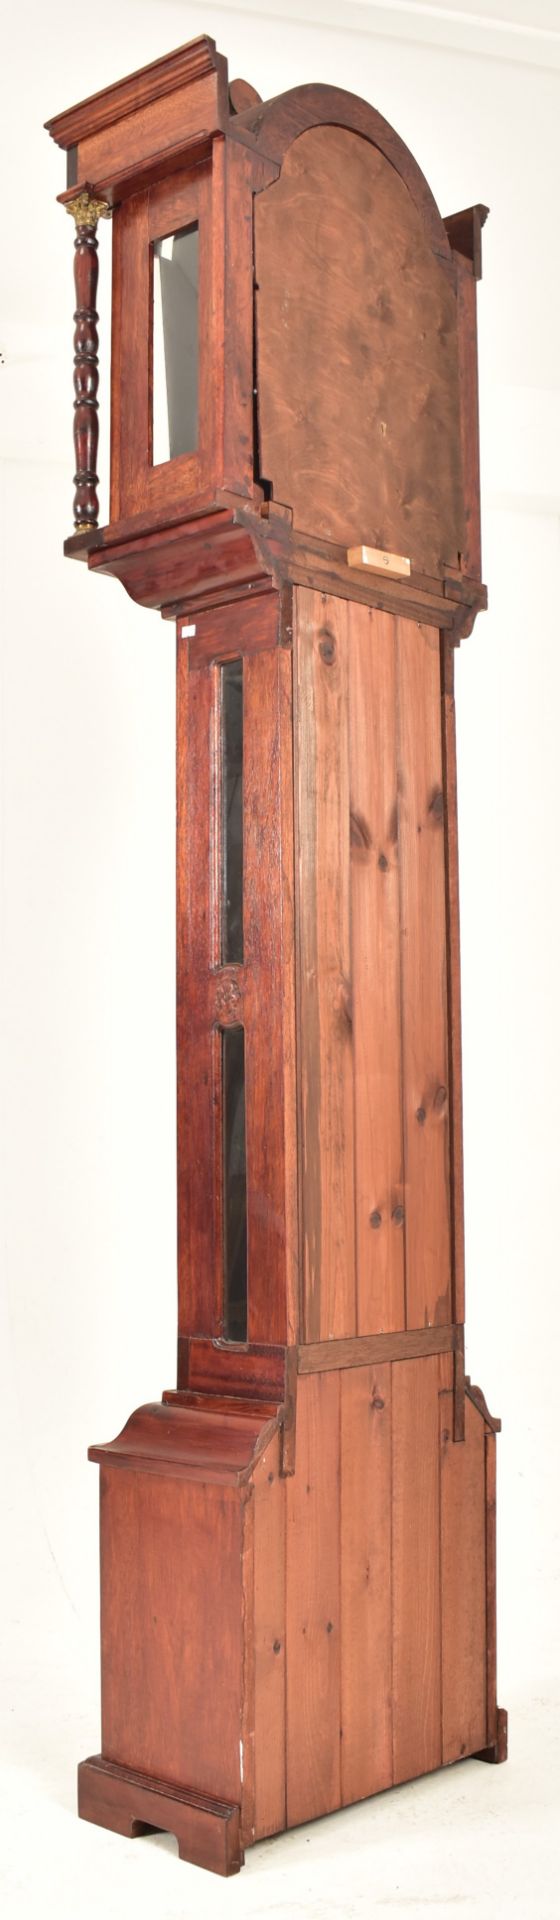 JAMES WEBB & SON OF FROME WEST COUNTRY LONGCASE CLOCK - Image 6 of 11